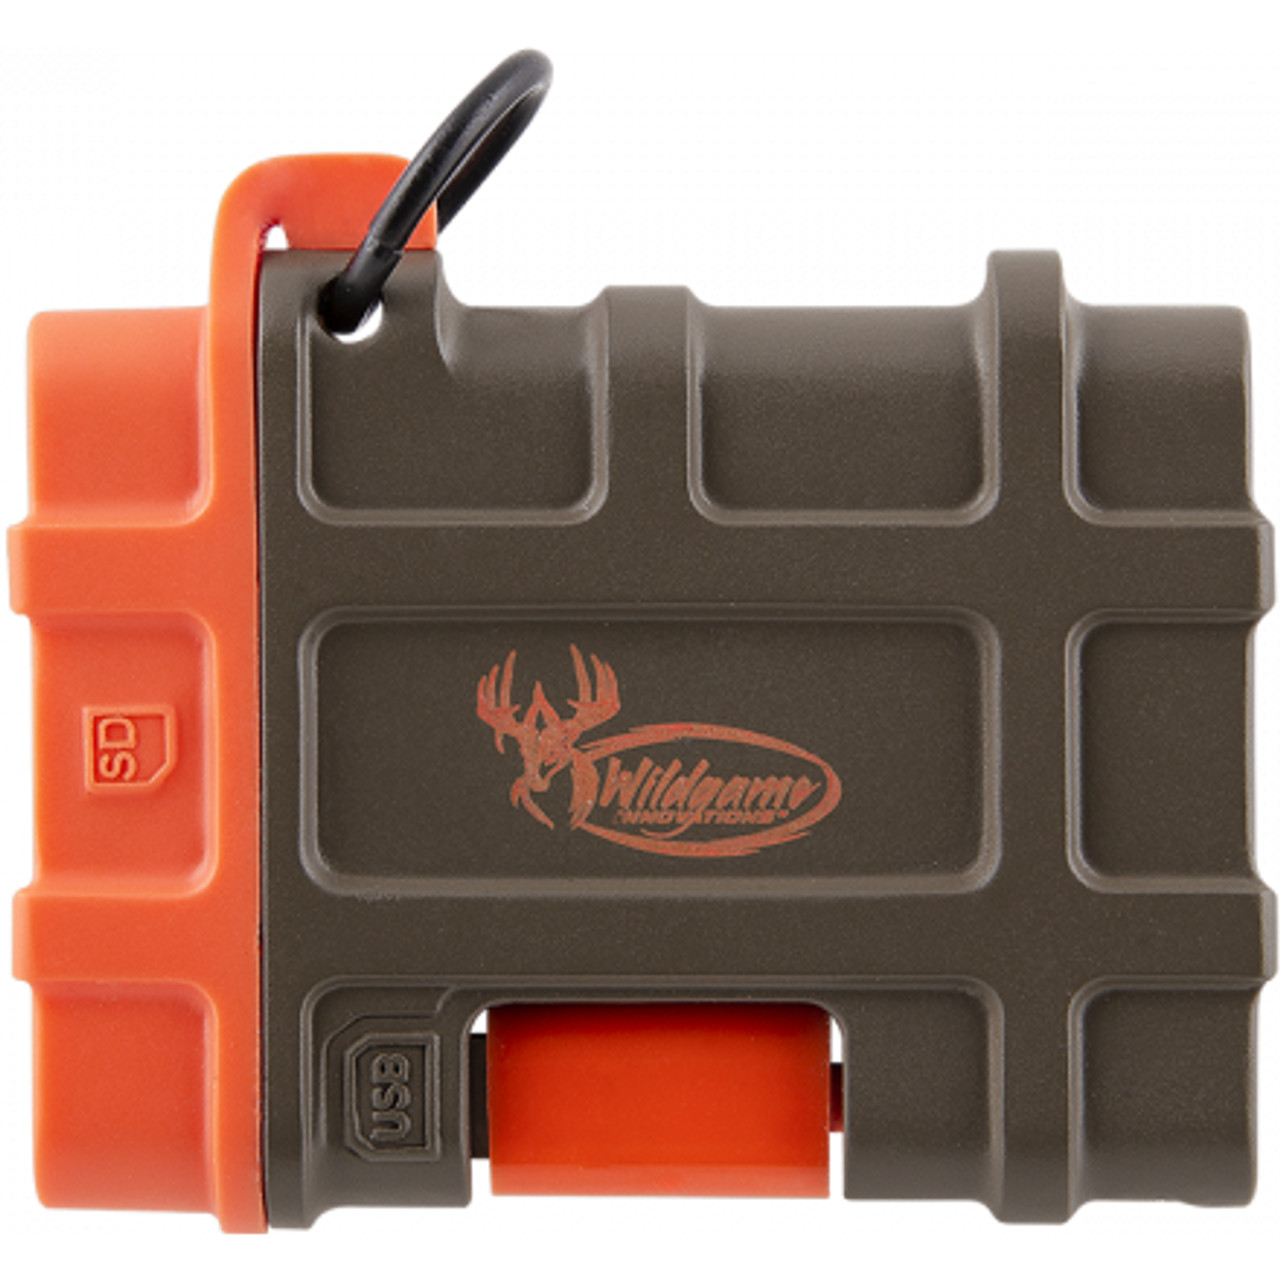 Wildgame Innovations SD Card Reader Apple